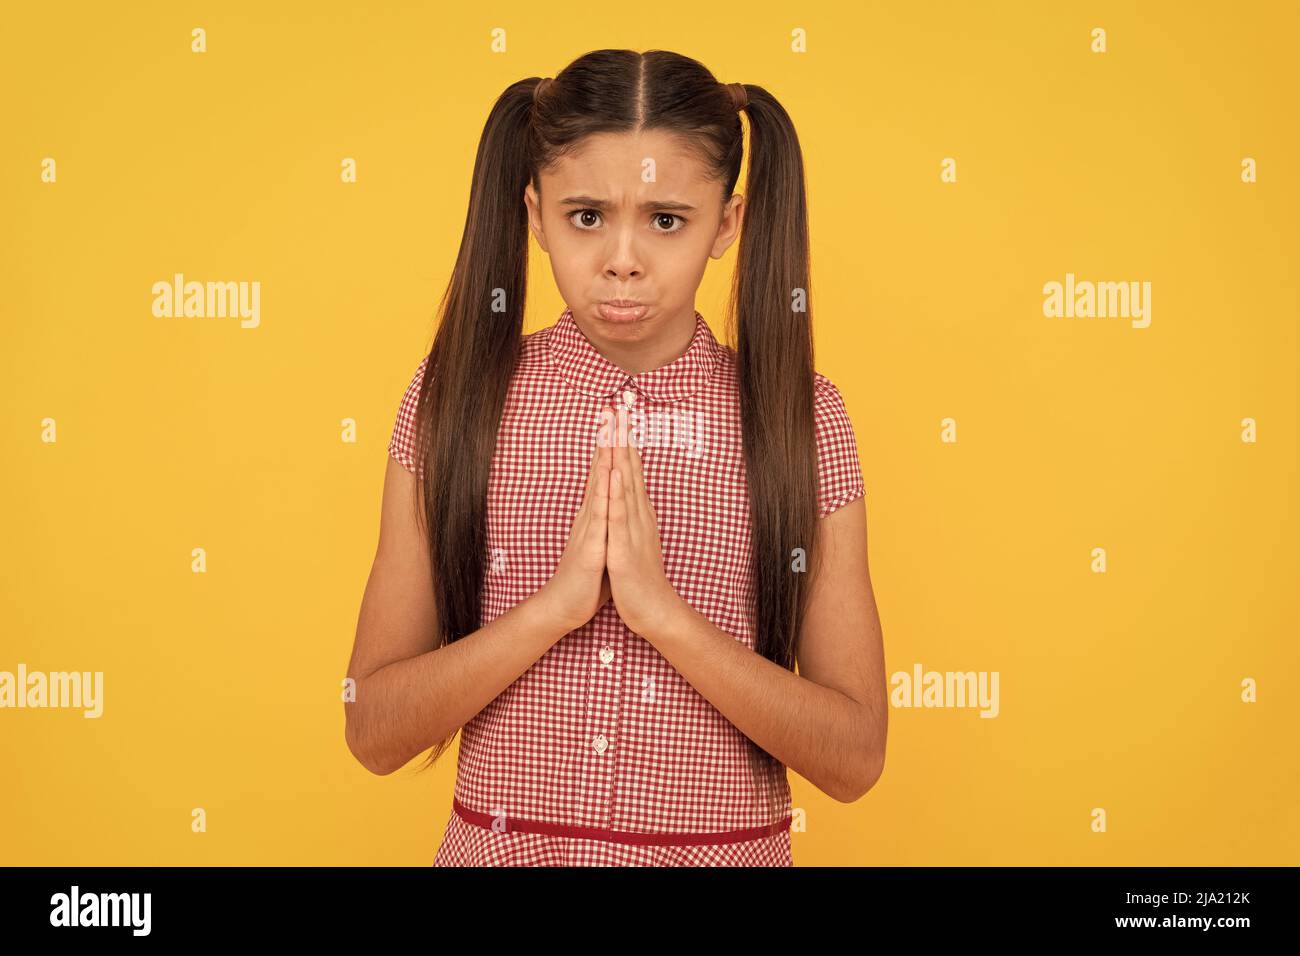 Unhappy girl prayer plead holding palms together in prayer gesture yellow background, pleading Stock Photo